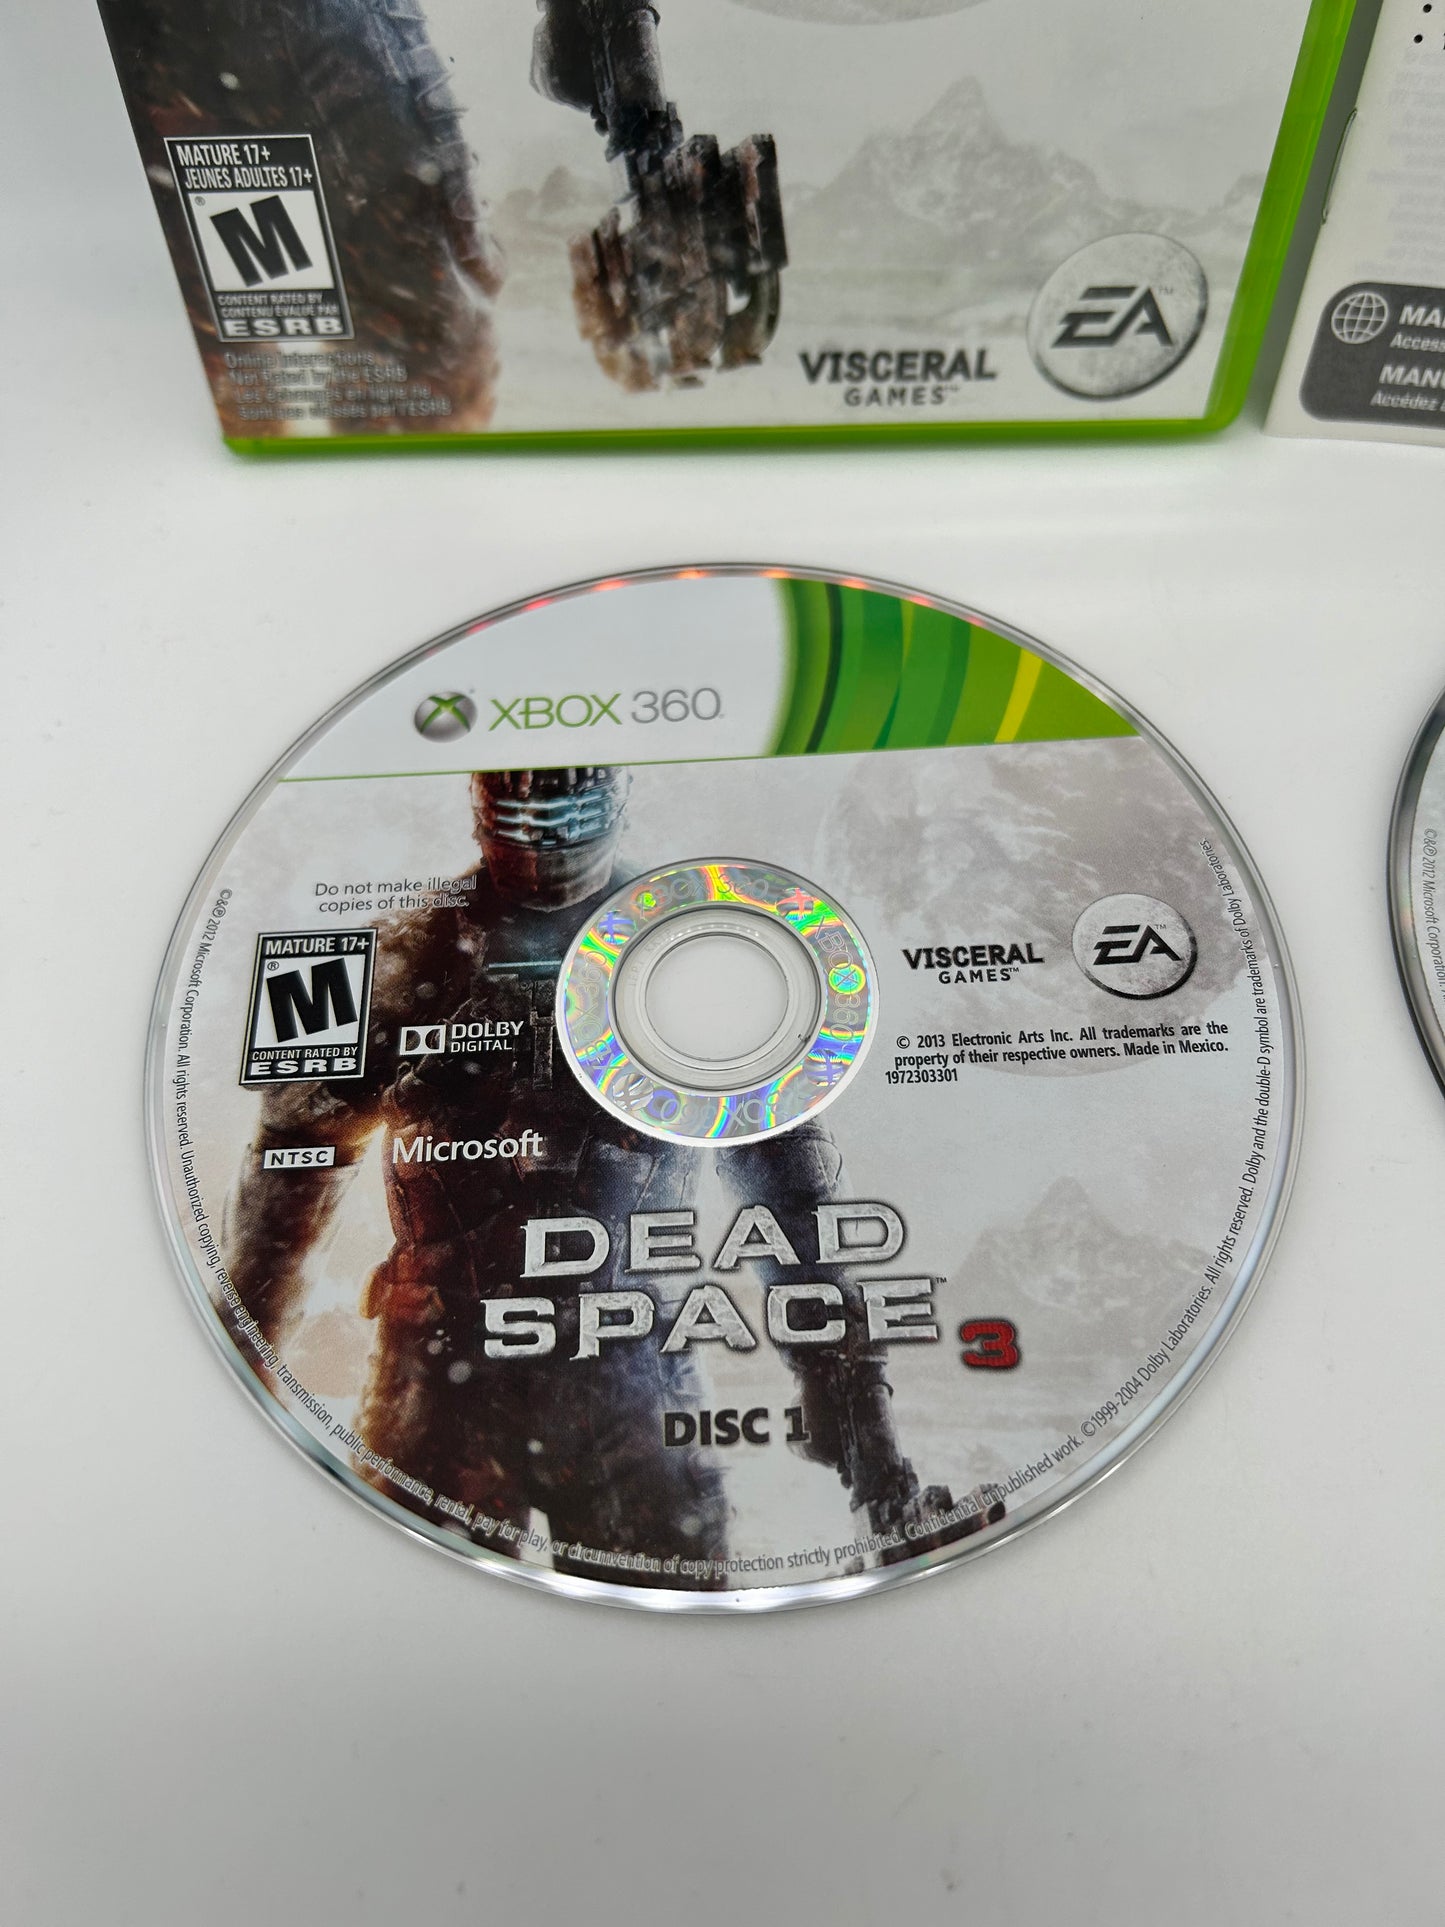 MiCROSOFT XBOX 360 | DEAD SPACE 3 | LiMiTED EDiTiON